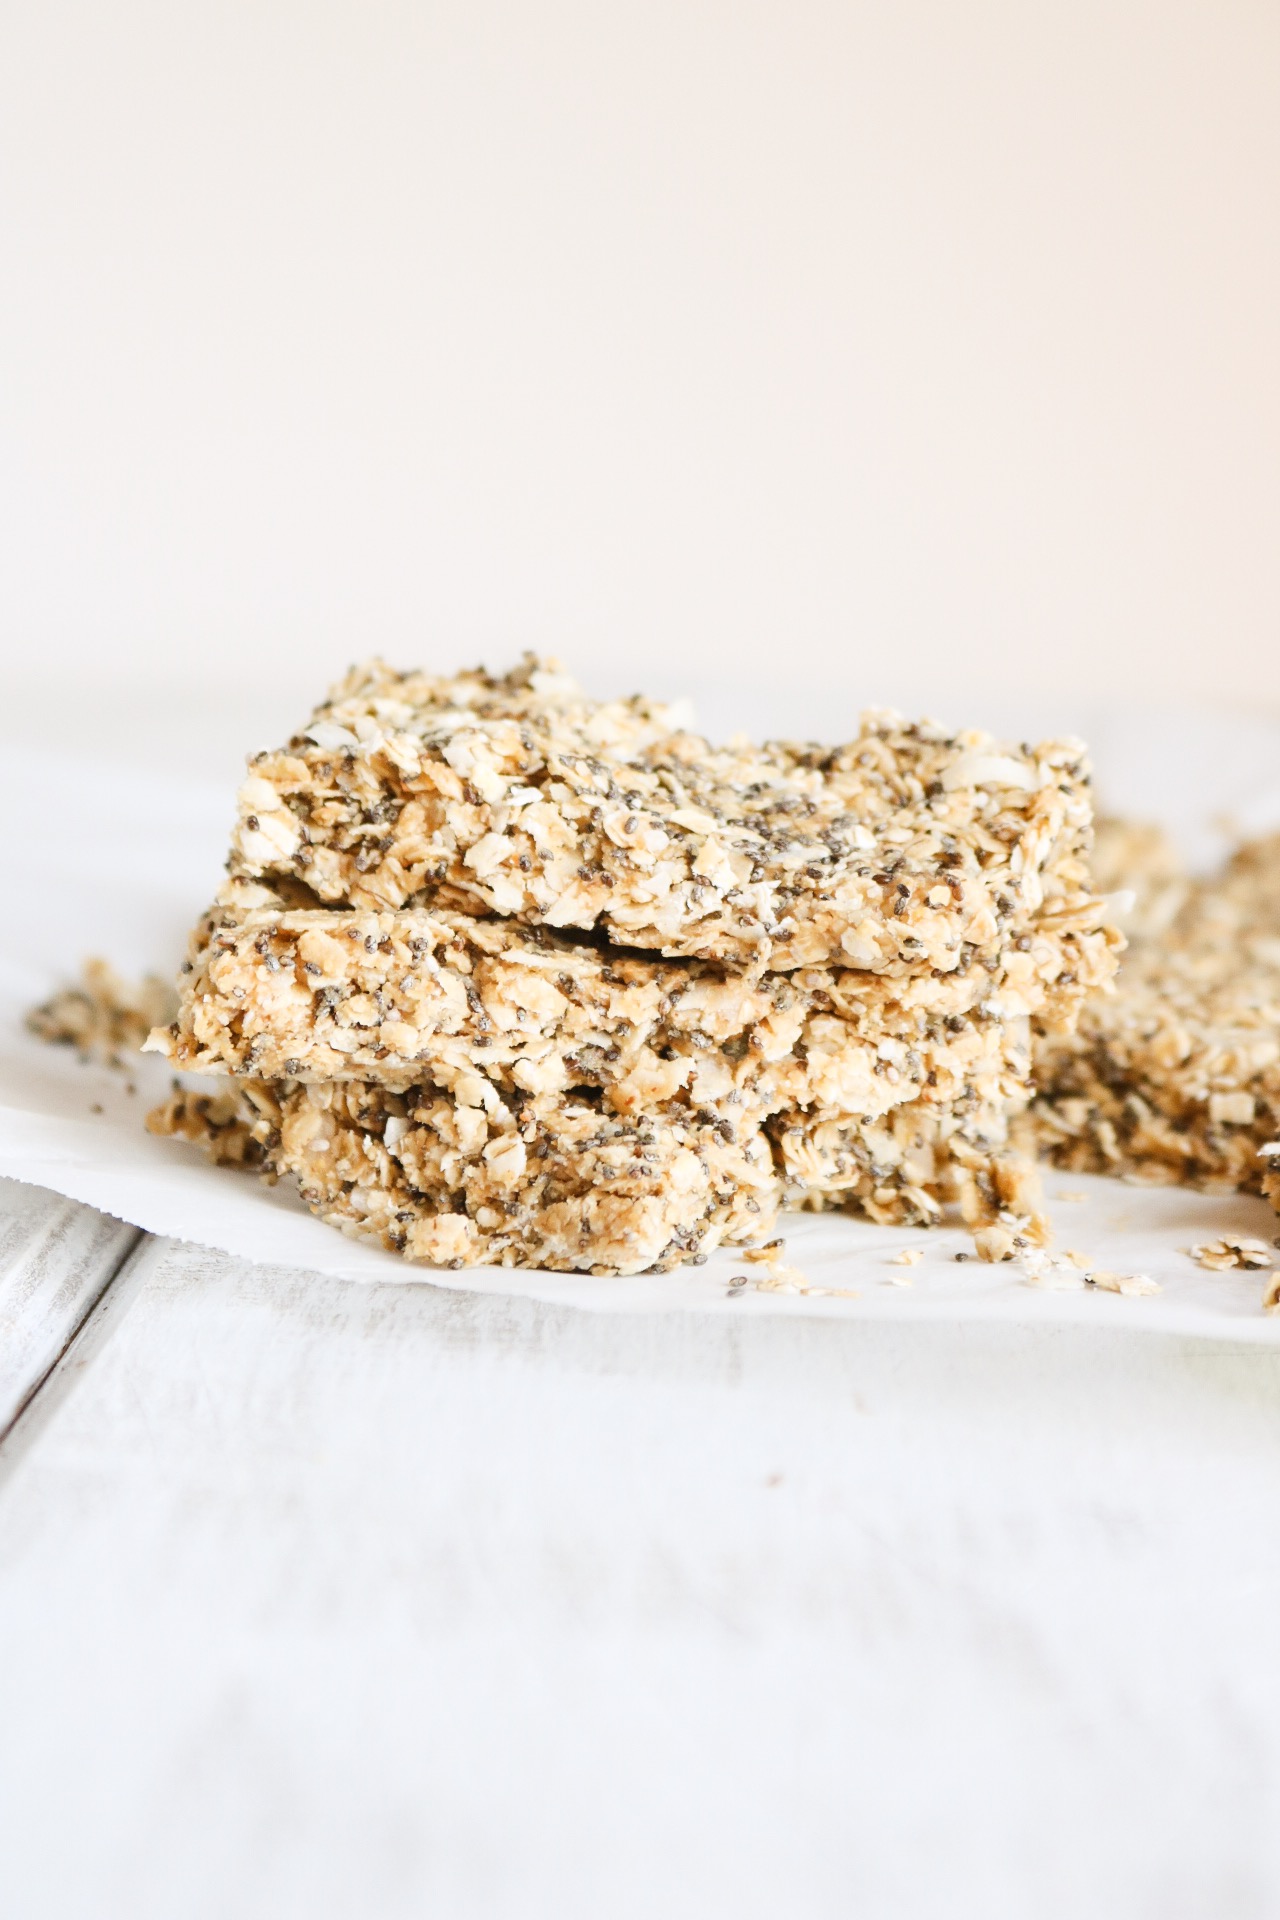 Vegan No Bake Breakfast Bars with Nut Butter and Coconut